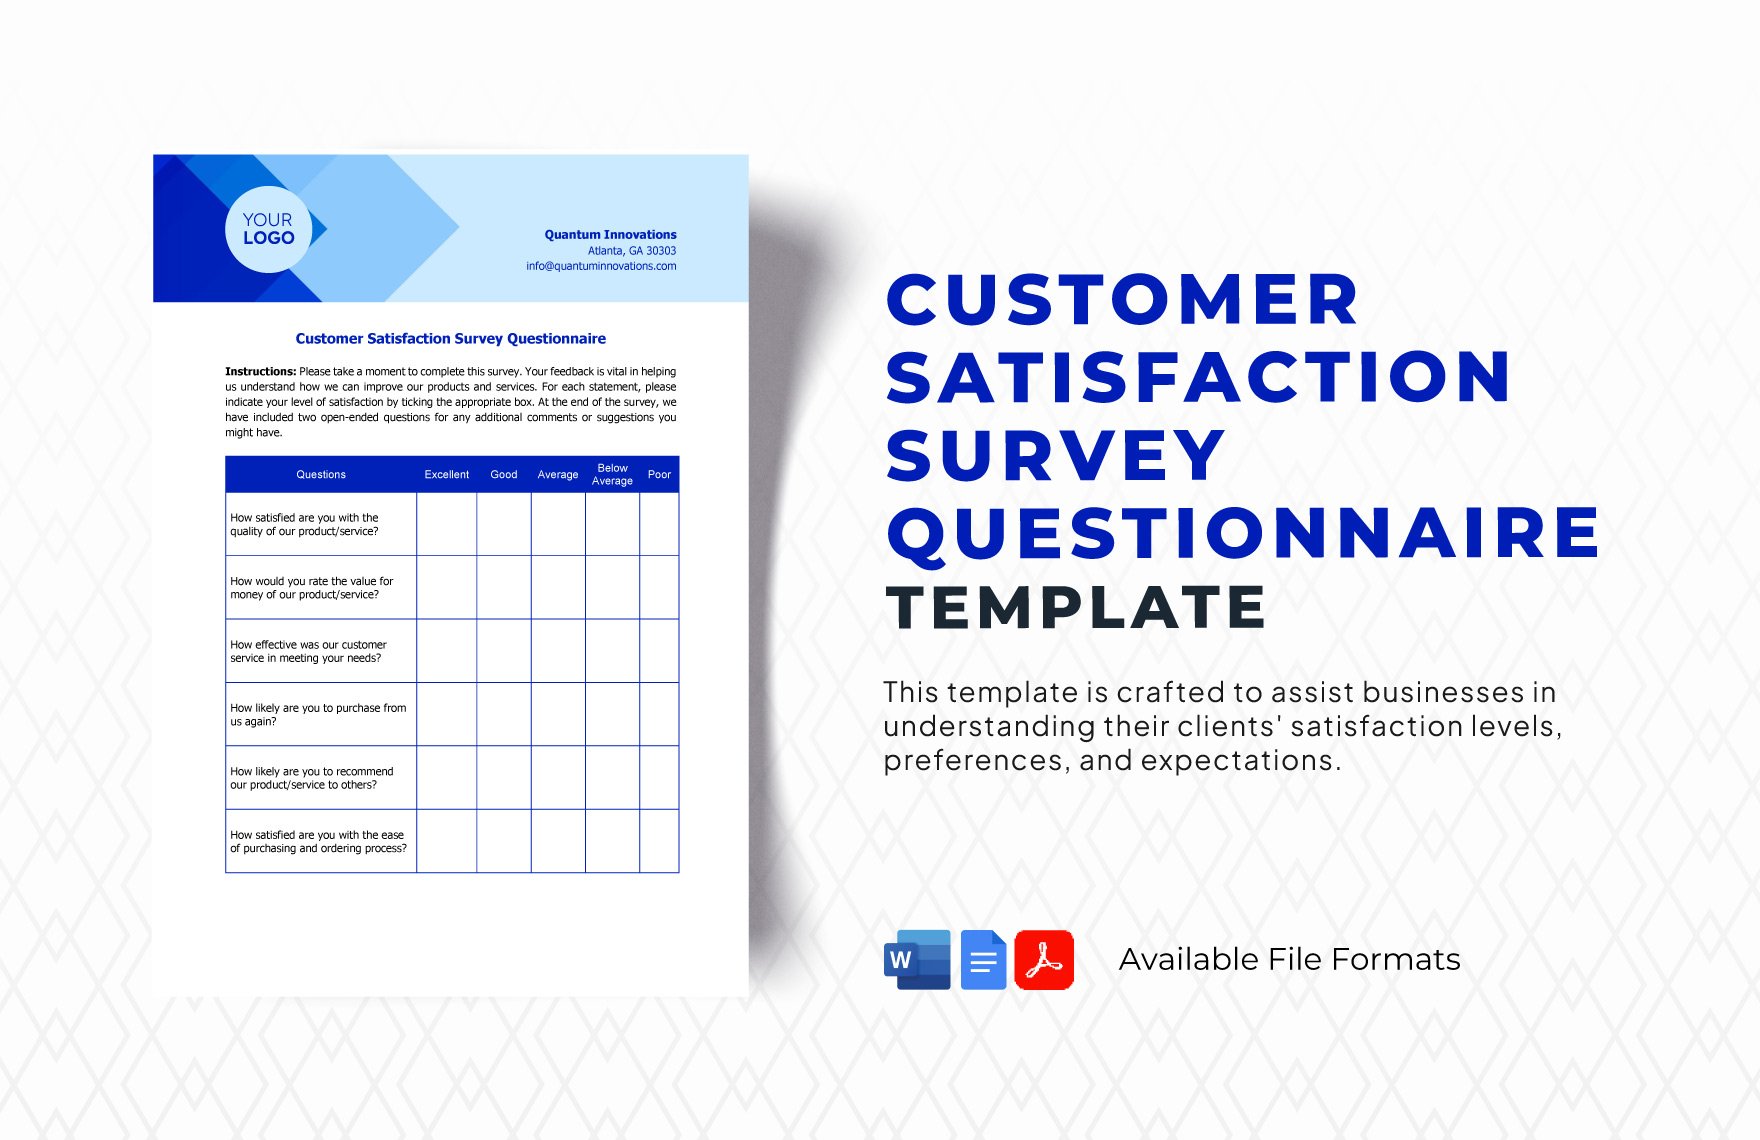 Free Customer Satisfaction Survey Questionnaire Template in Word, Google Docs, PDF